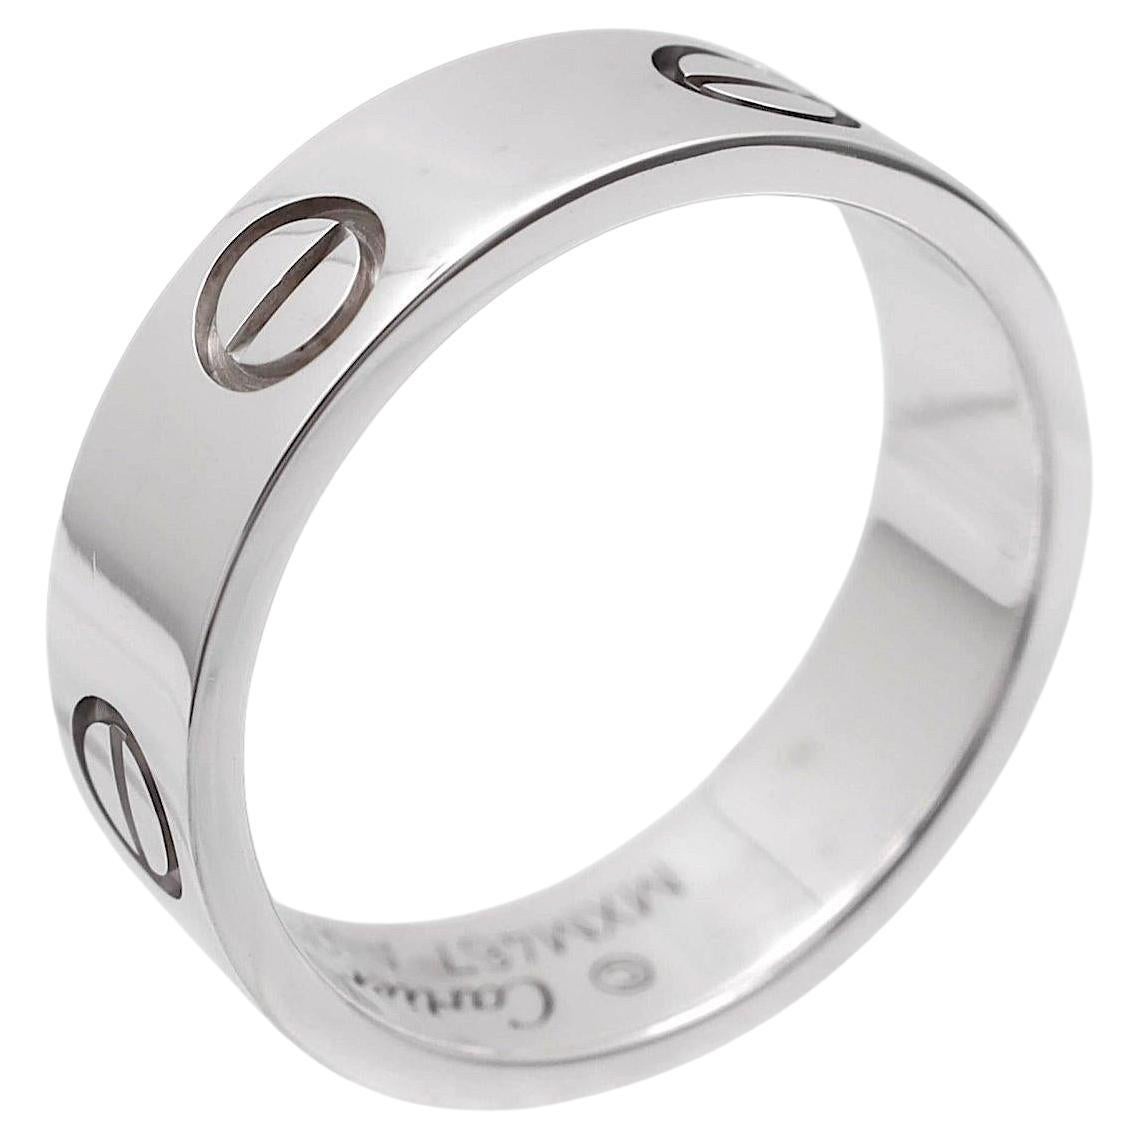 Cartier Love Ring in 18K White Gold 5.5mm Size 54 (US6.75) For Sale